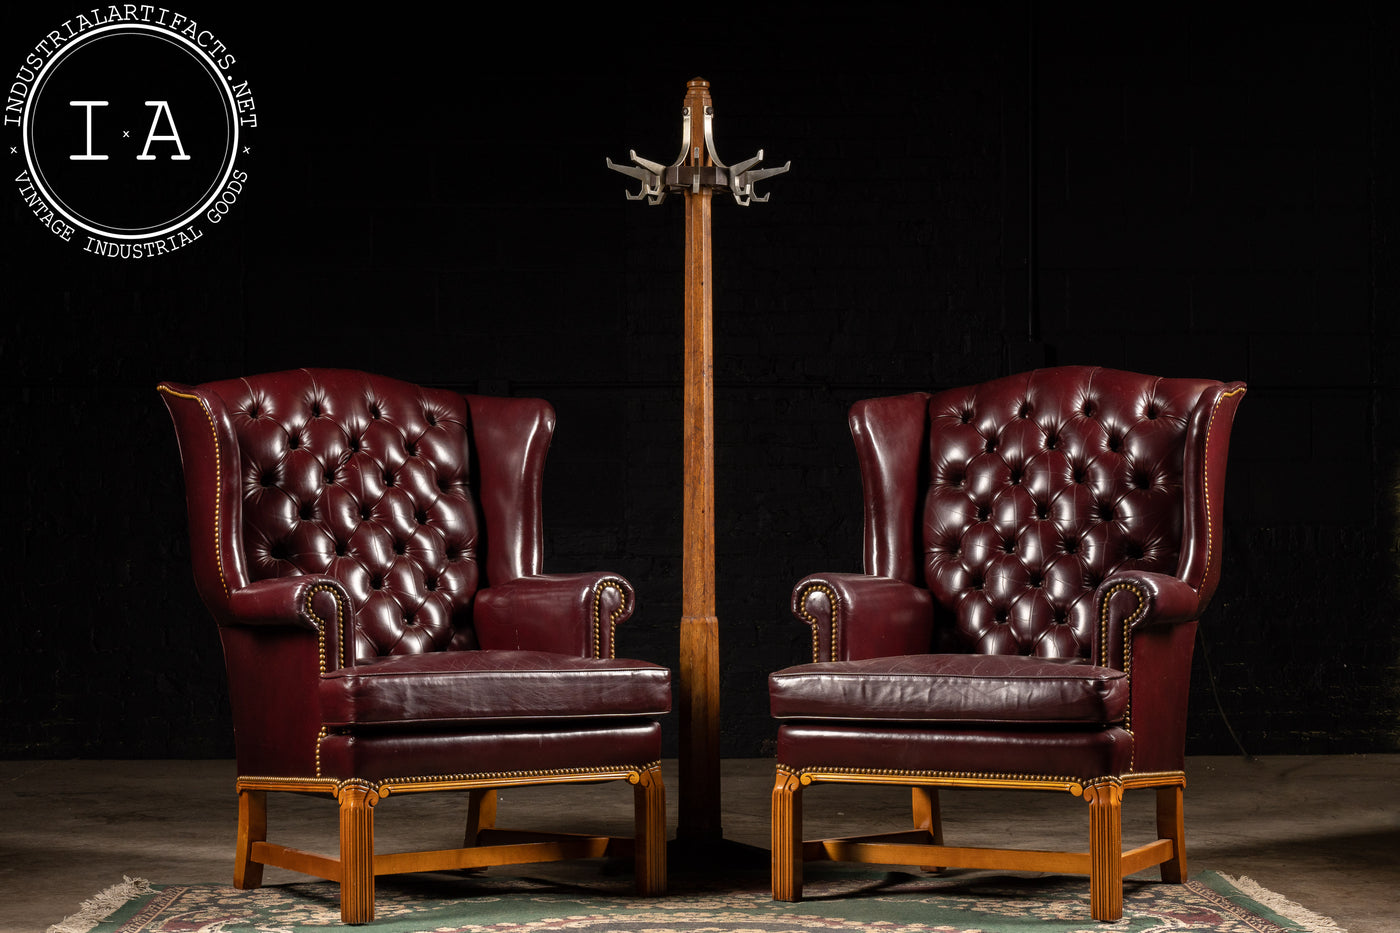 Vintage Tufted Leather Wingback Armchair In B urgundy